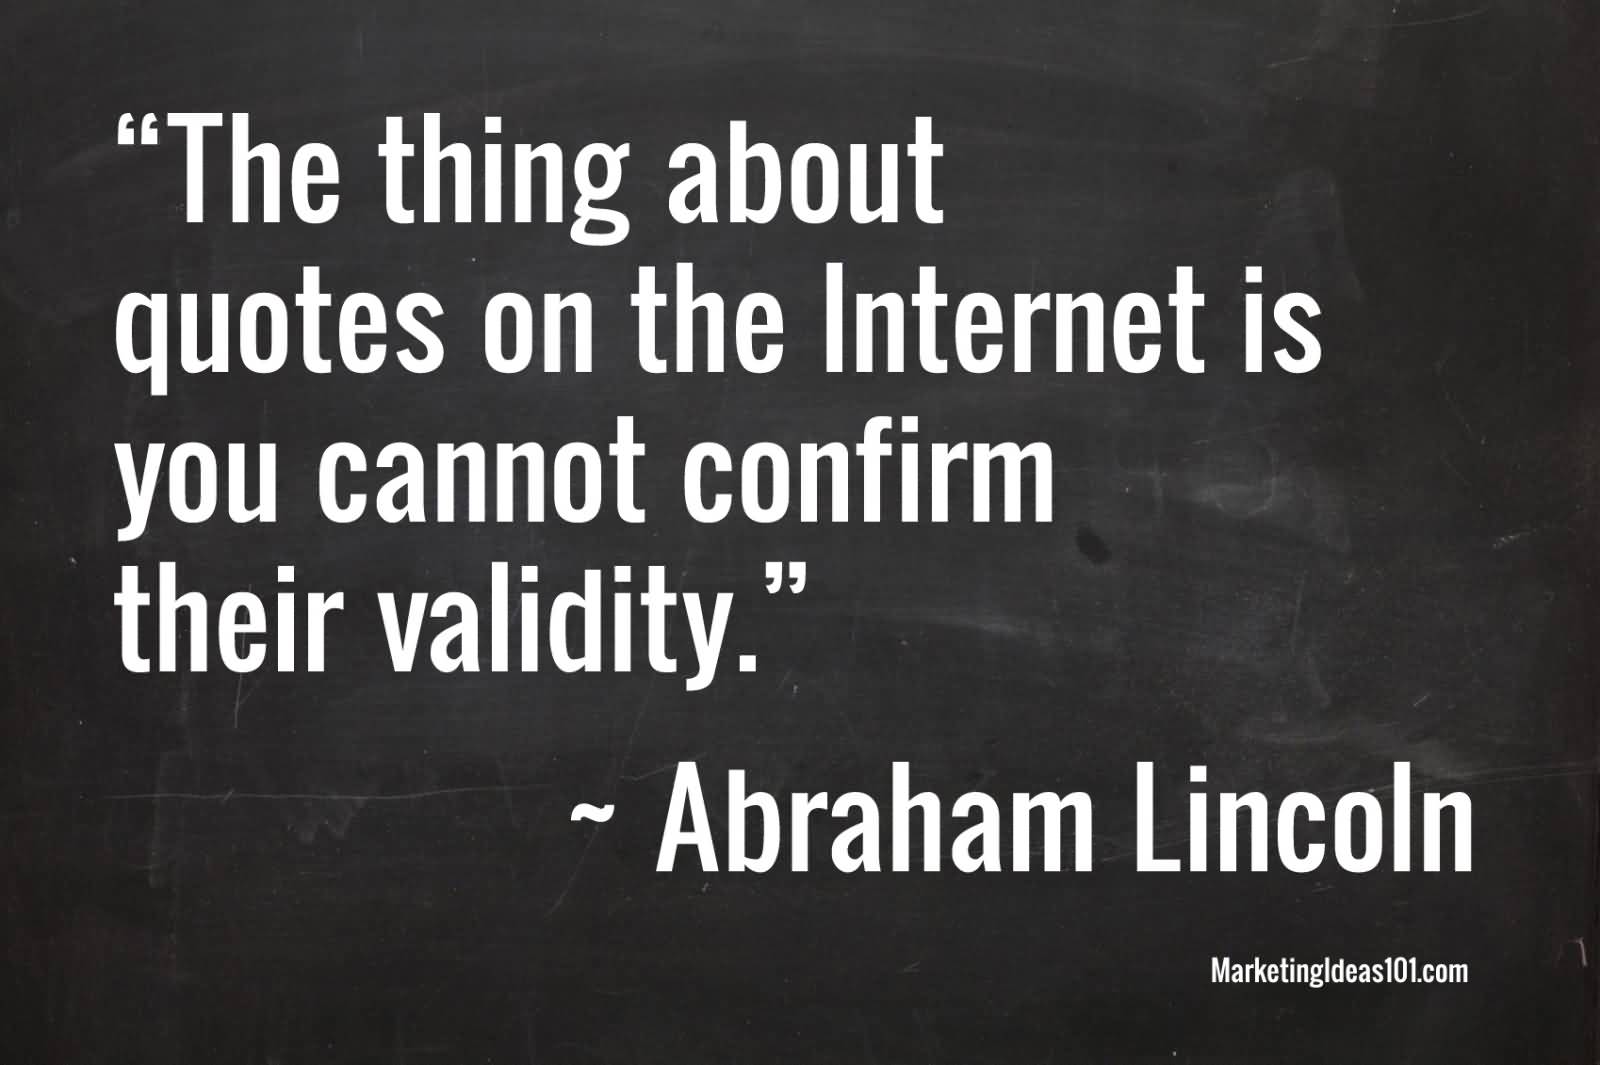 The thing about quotes on the internet is that you cannot confirm their validity. Abraham Lincoln